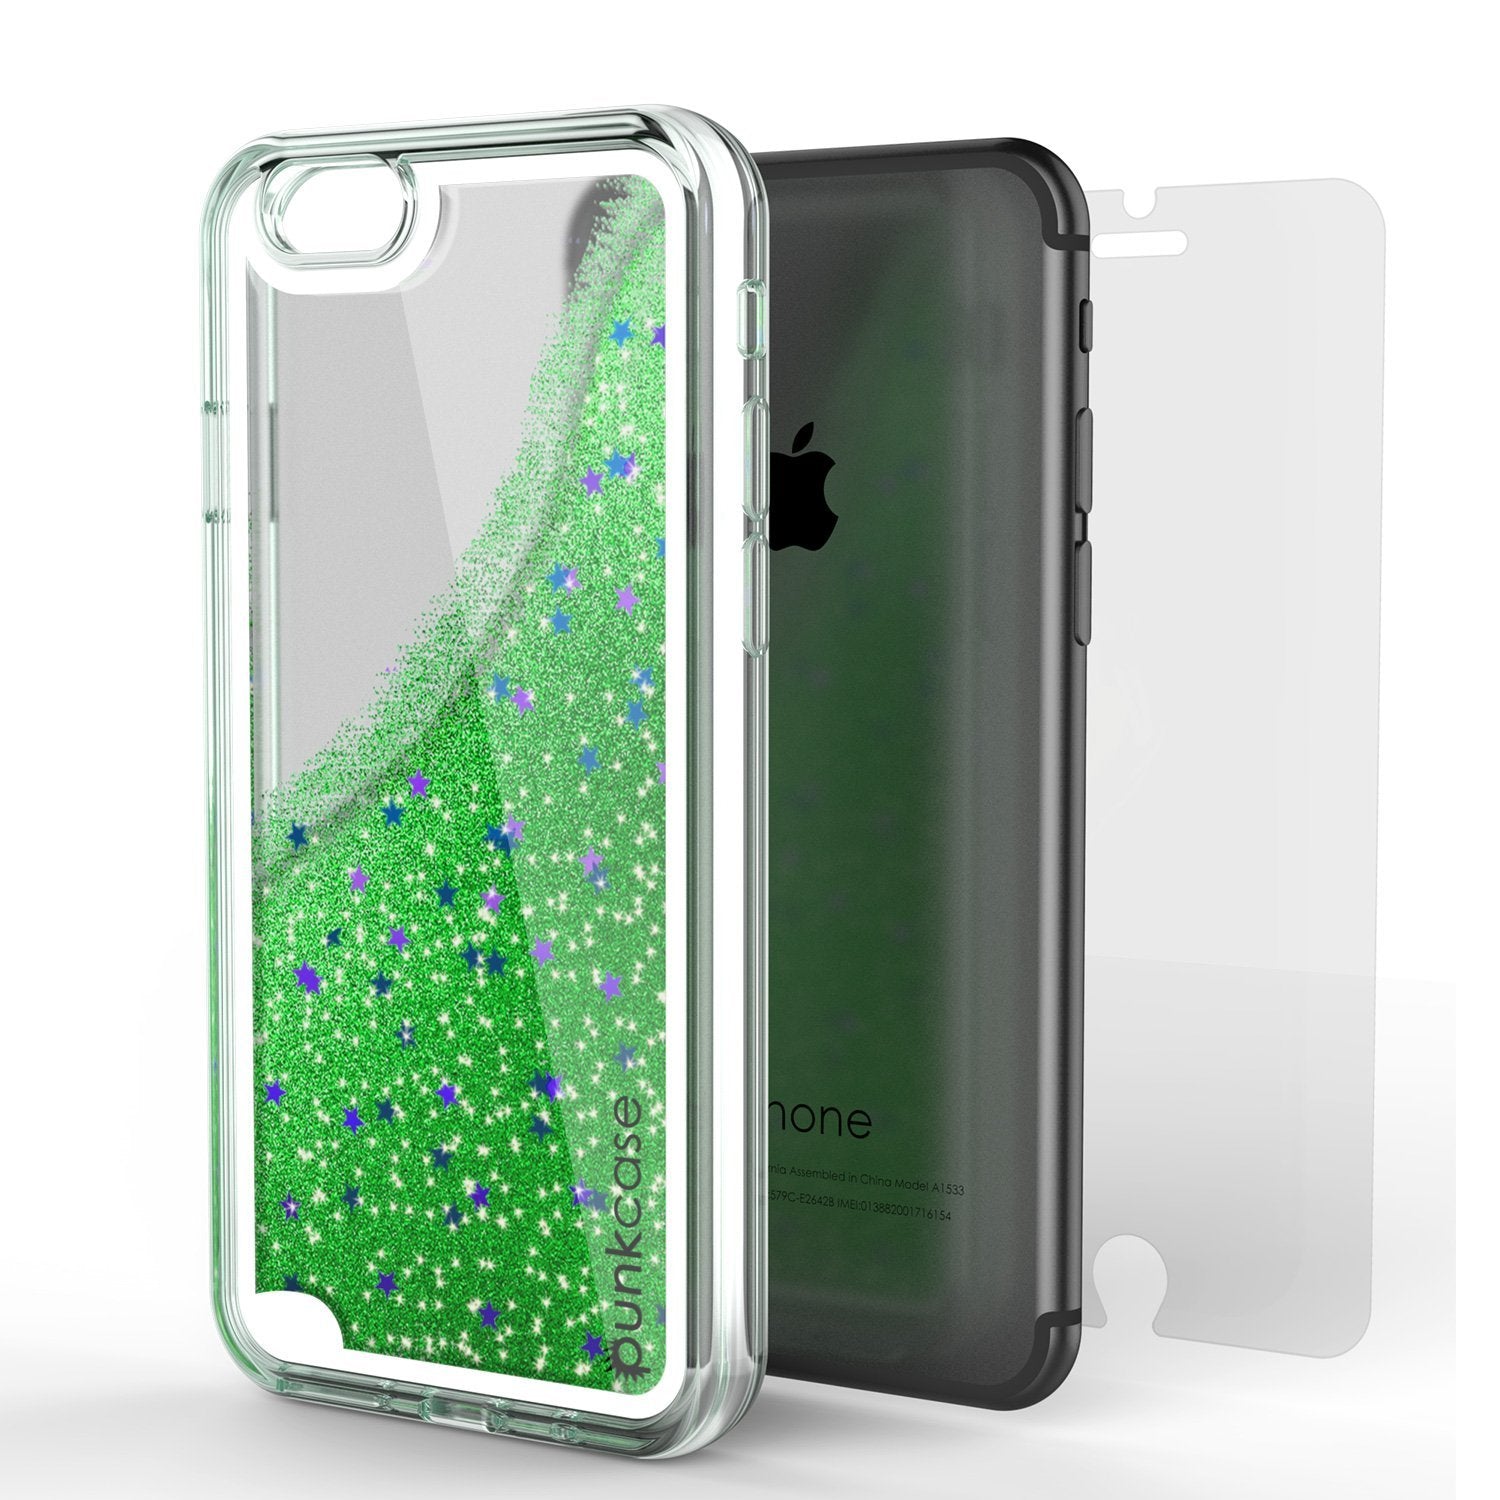 iPhone 8 Case, PunkCase LIQUID Green Series, Protective Dual Layer Floating Glitter Cover - PunkCase NZ